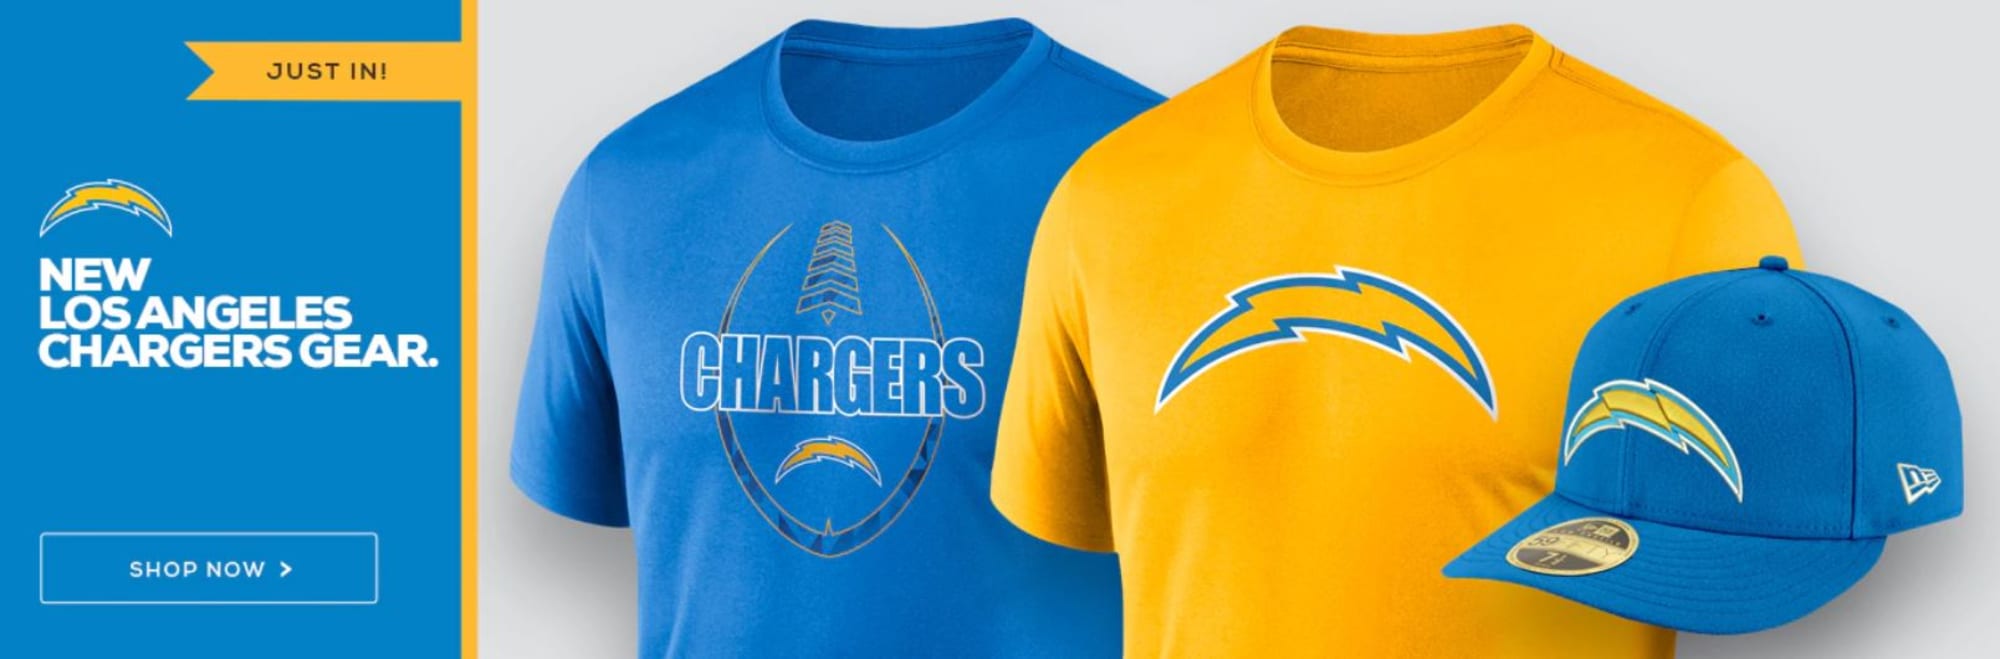 nfl chargers merchandise